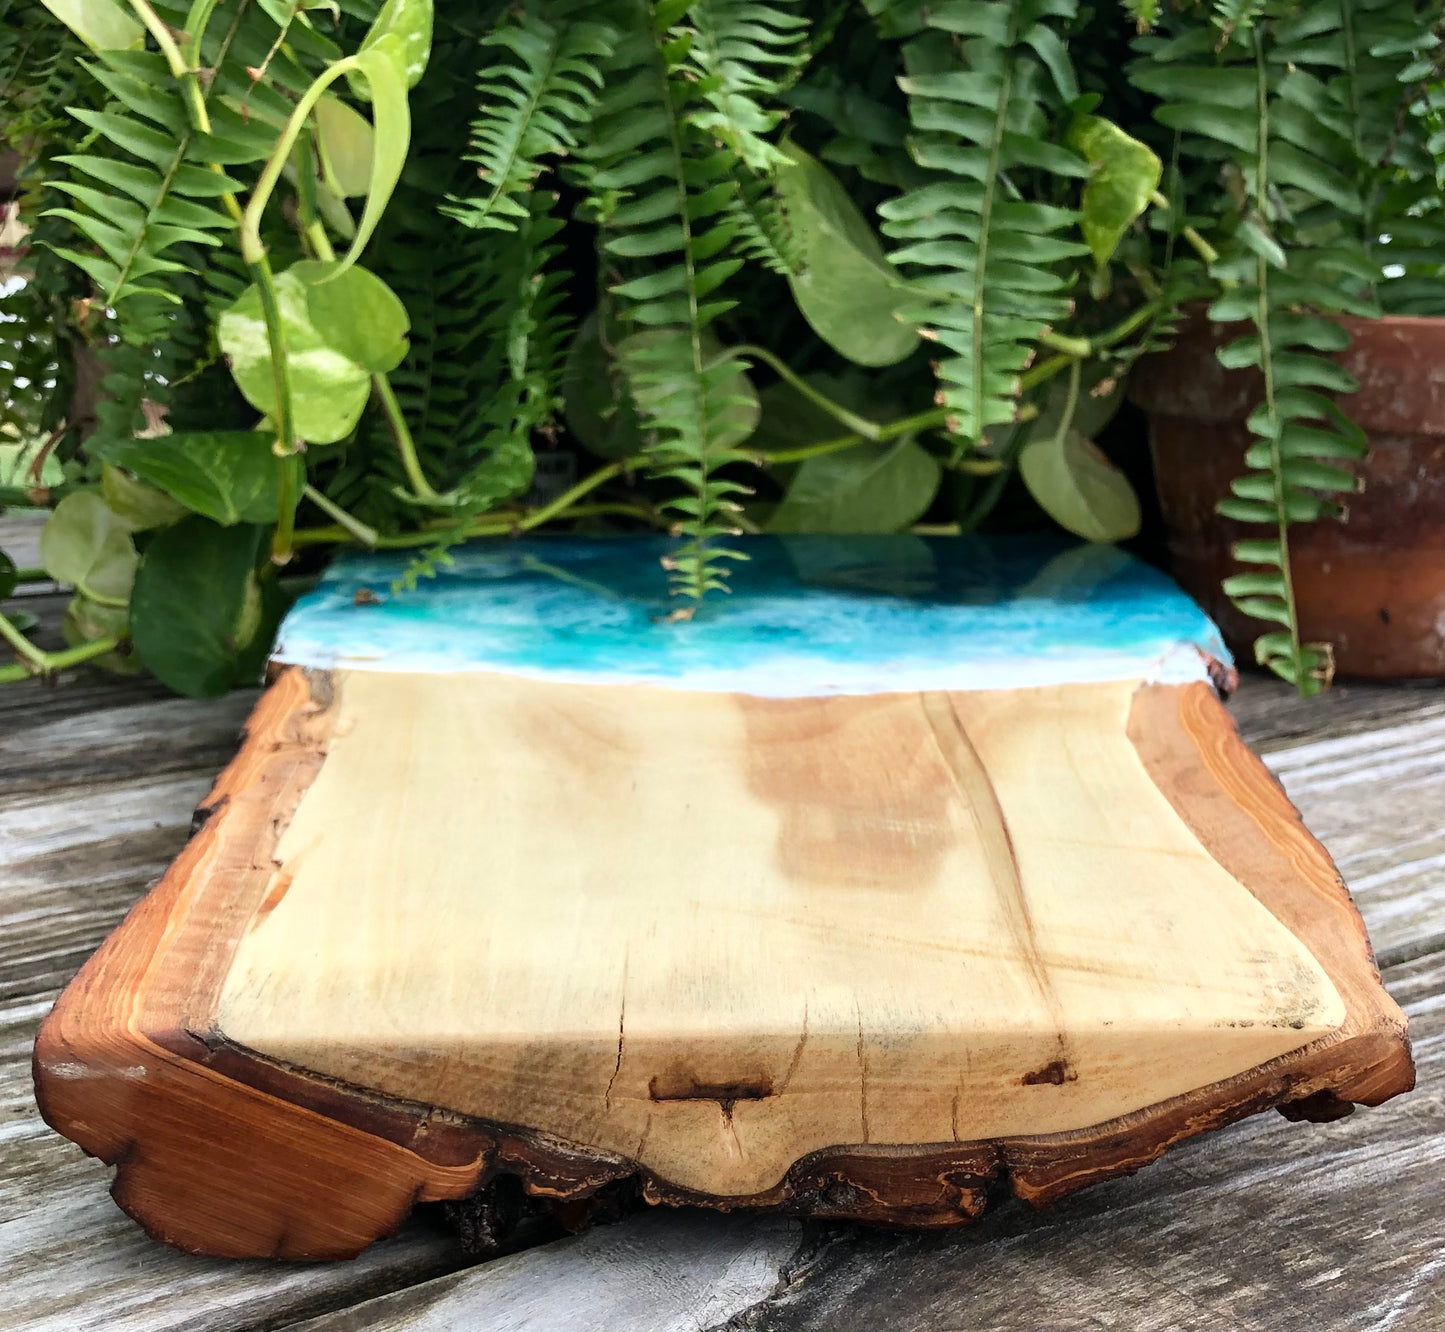 ***SOLD***Stunning Blue Hole Charcuterie Board